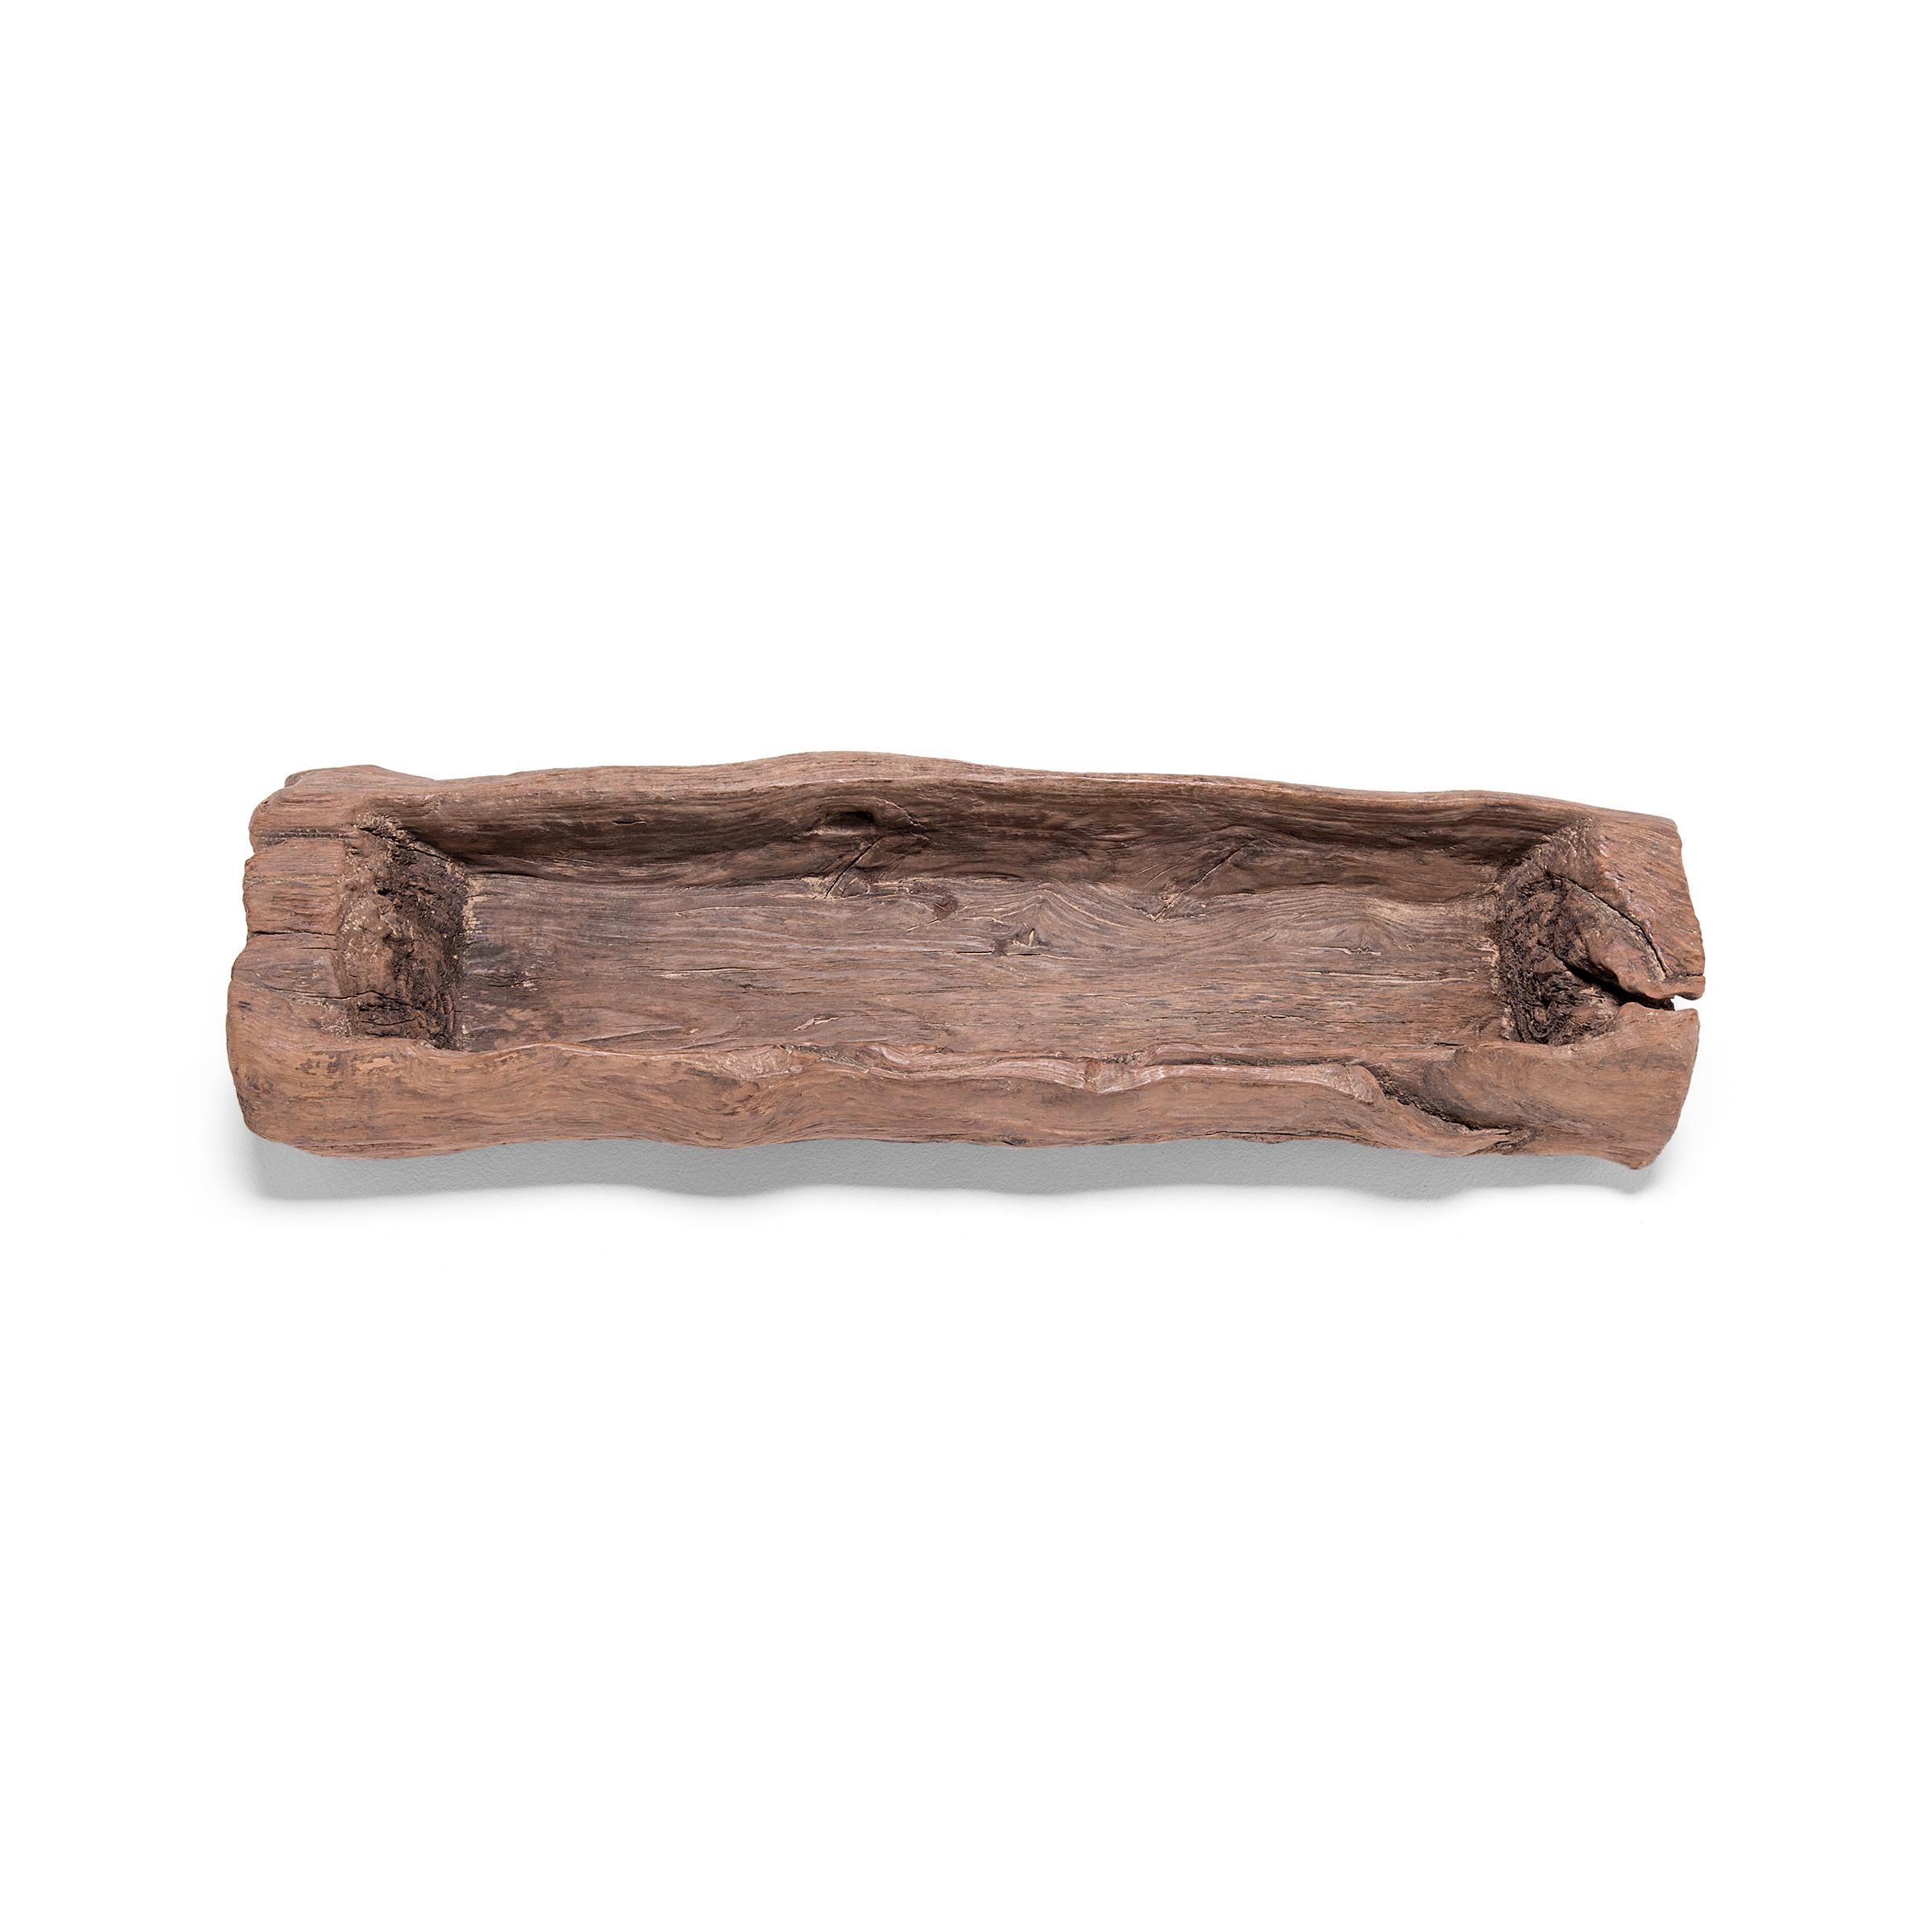 A common sight throughout rural Qing-dynasty China, this provincial trough from China's Shanxi province once held grain for livestock and barnyard fowl. The rustic trough showcases the expressive grain and raw texture of Chinese cypress, deeply